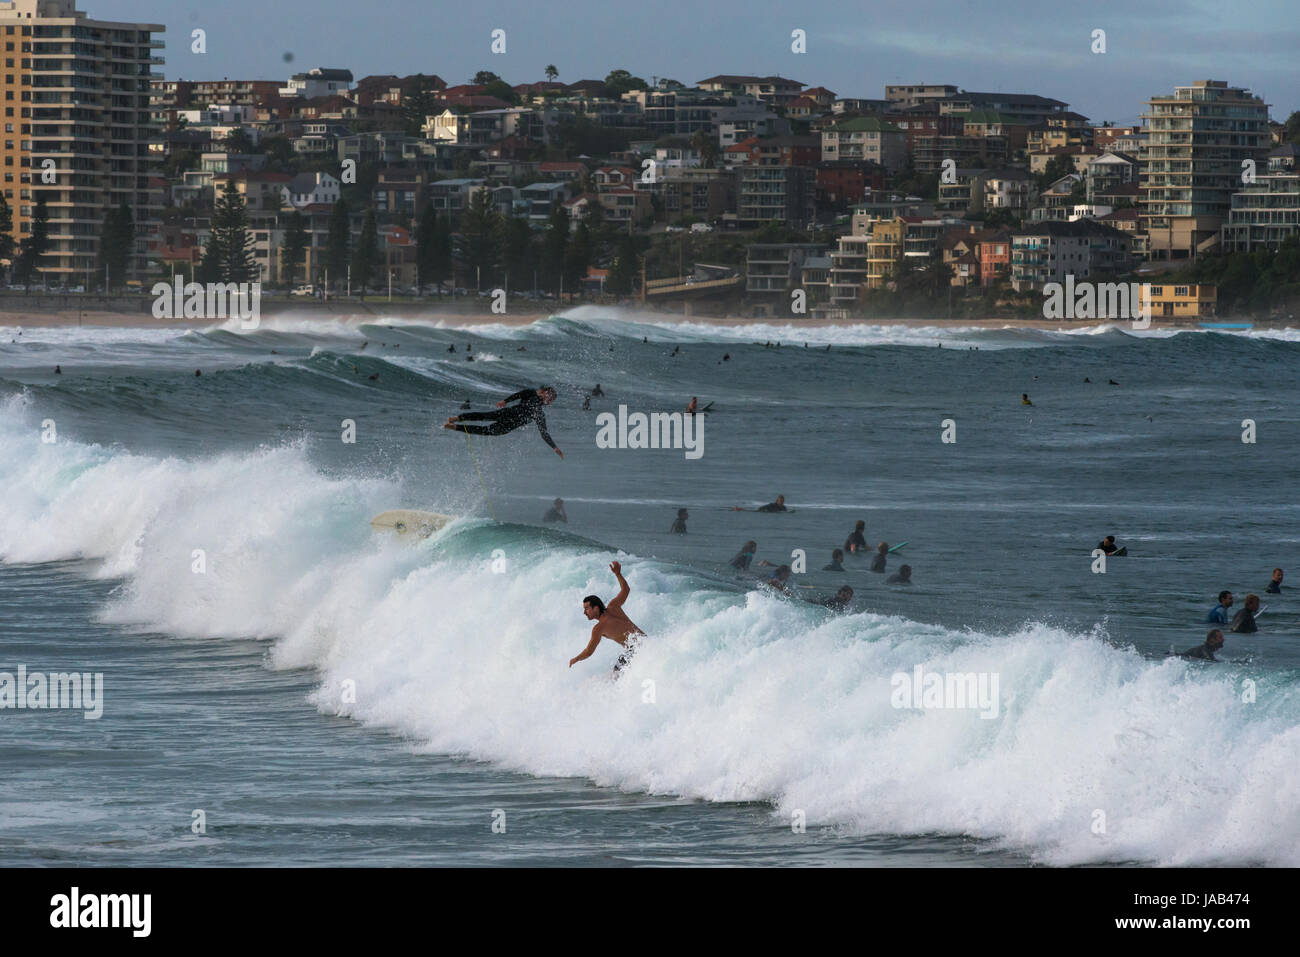 Dramatic scene with surfer flying high in the air at Manly beach, Sydney, New South Wales, Australia Stock Photo